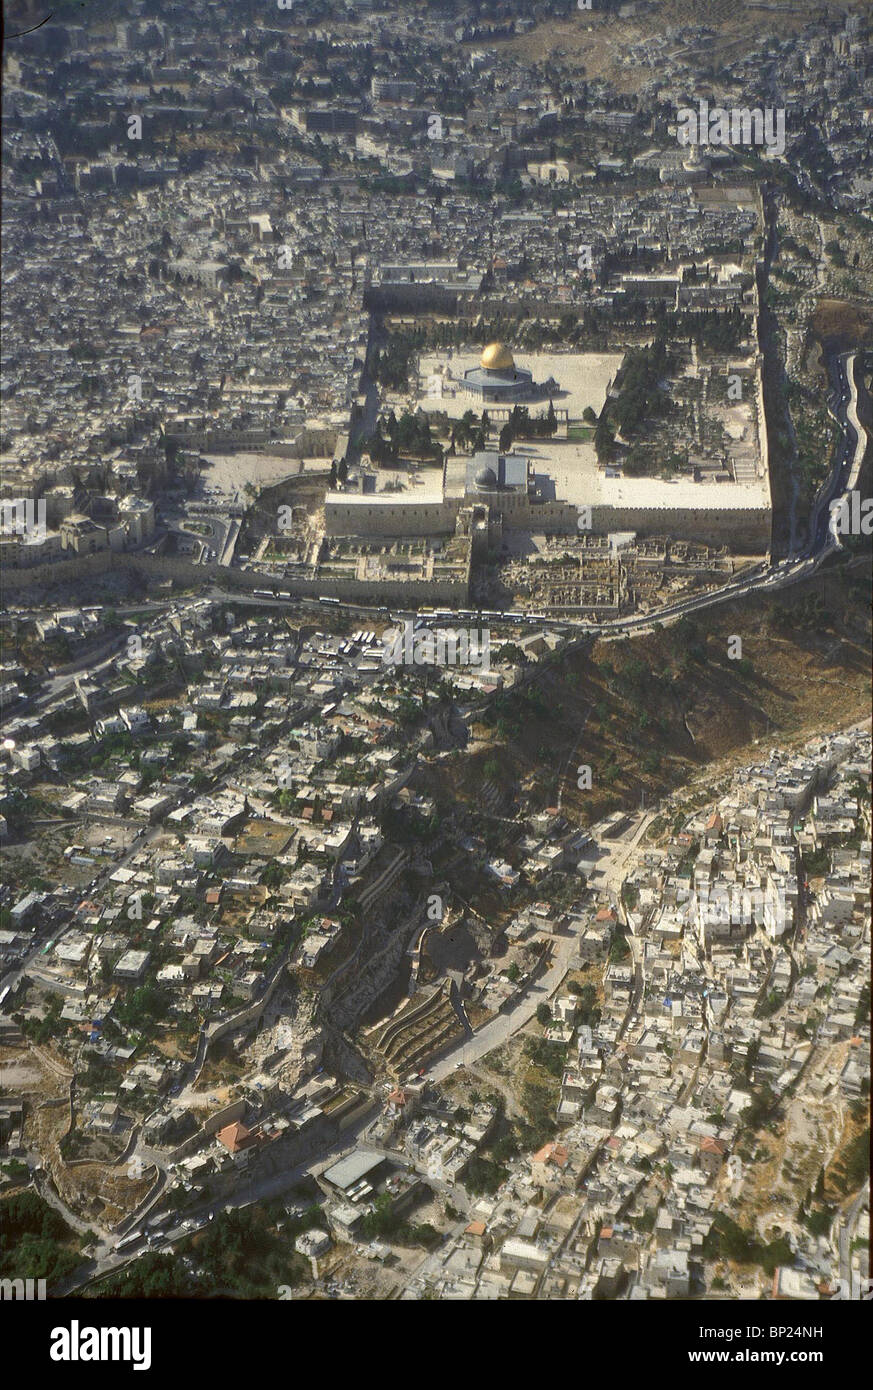 602. CITY OF DAVID - GENERAL VIEW FROM THE SOUTH WITH THE OLD CITY OF JERUSALEM IN THE BACKGROUND Stock Photo